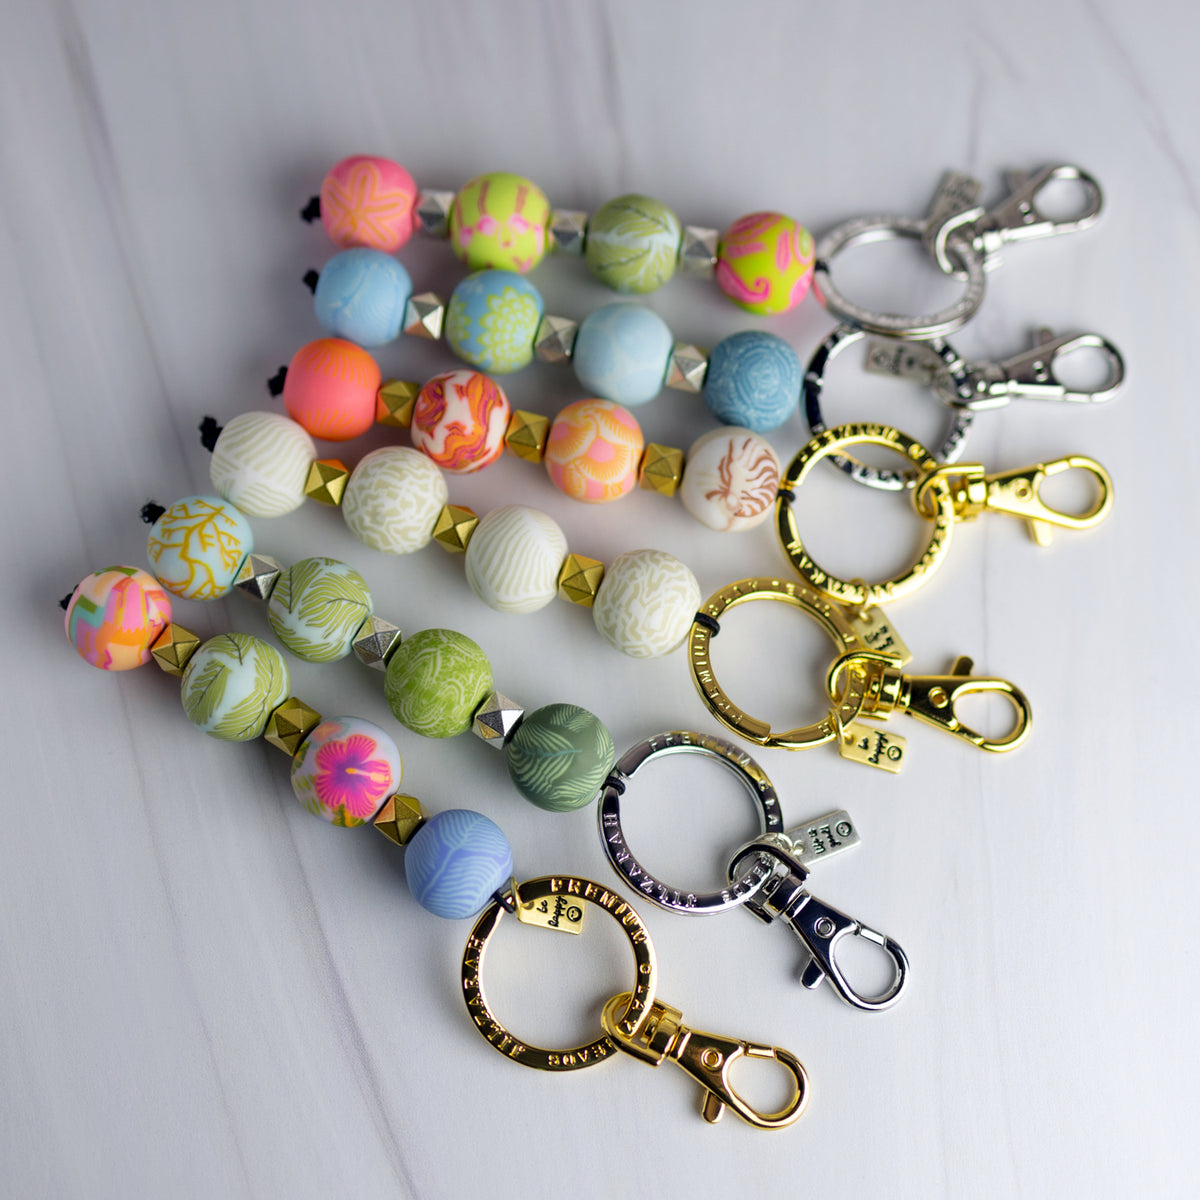 Beach Day Collection 4-Ball Keychain Variety Pack